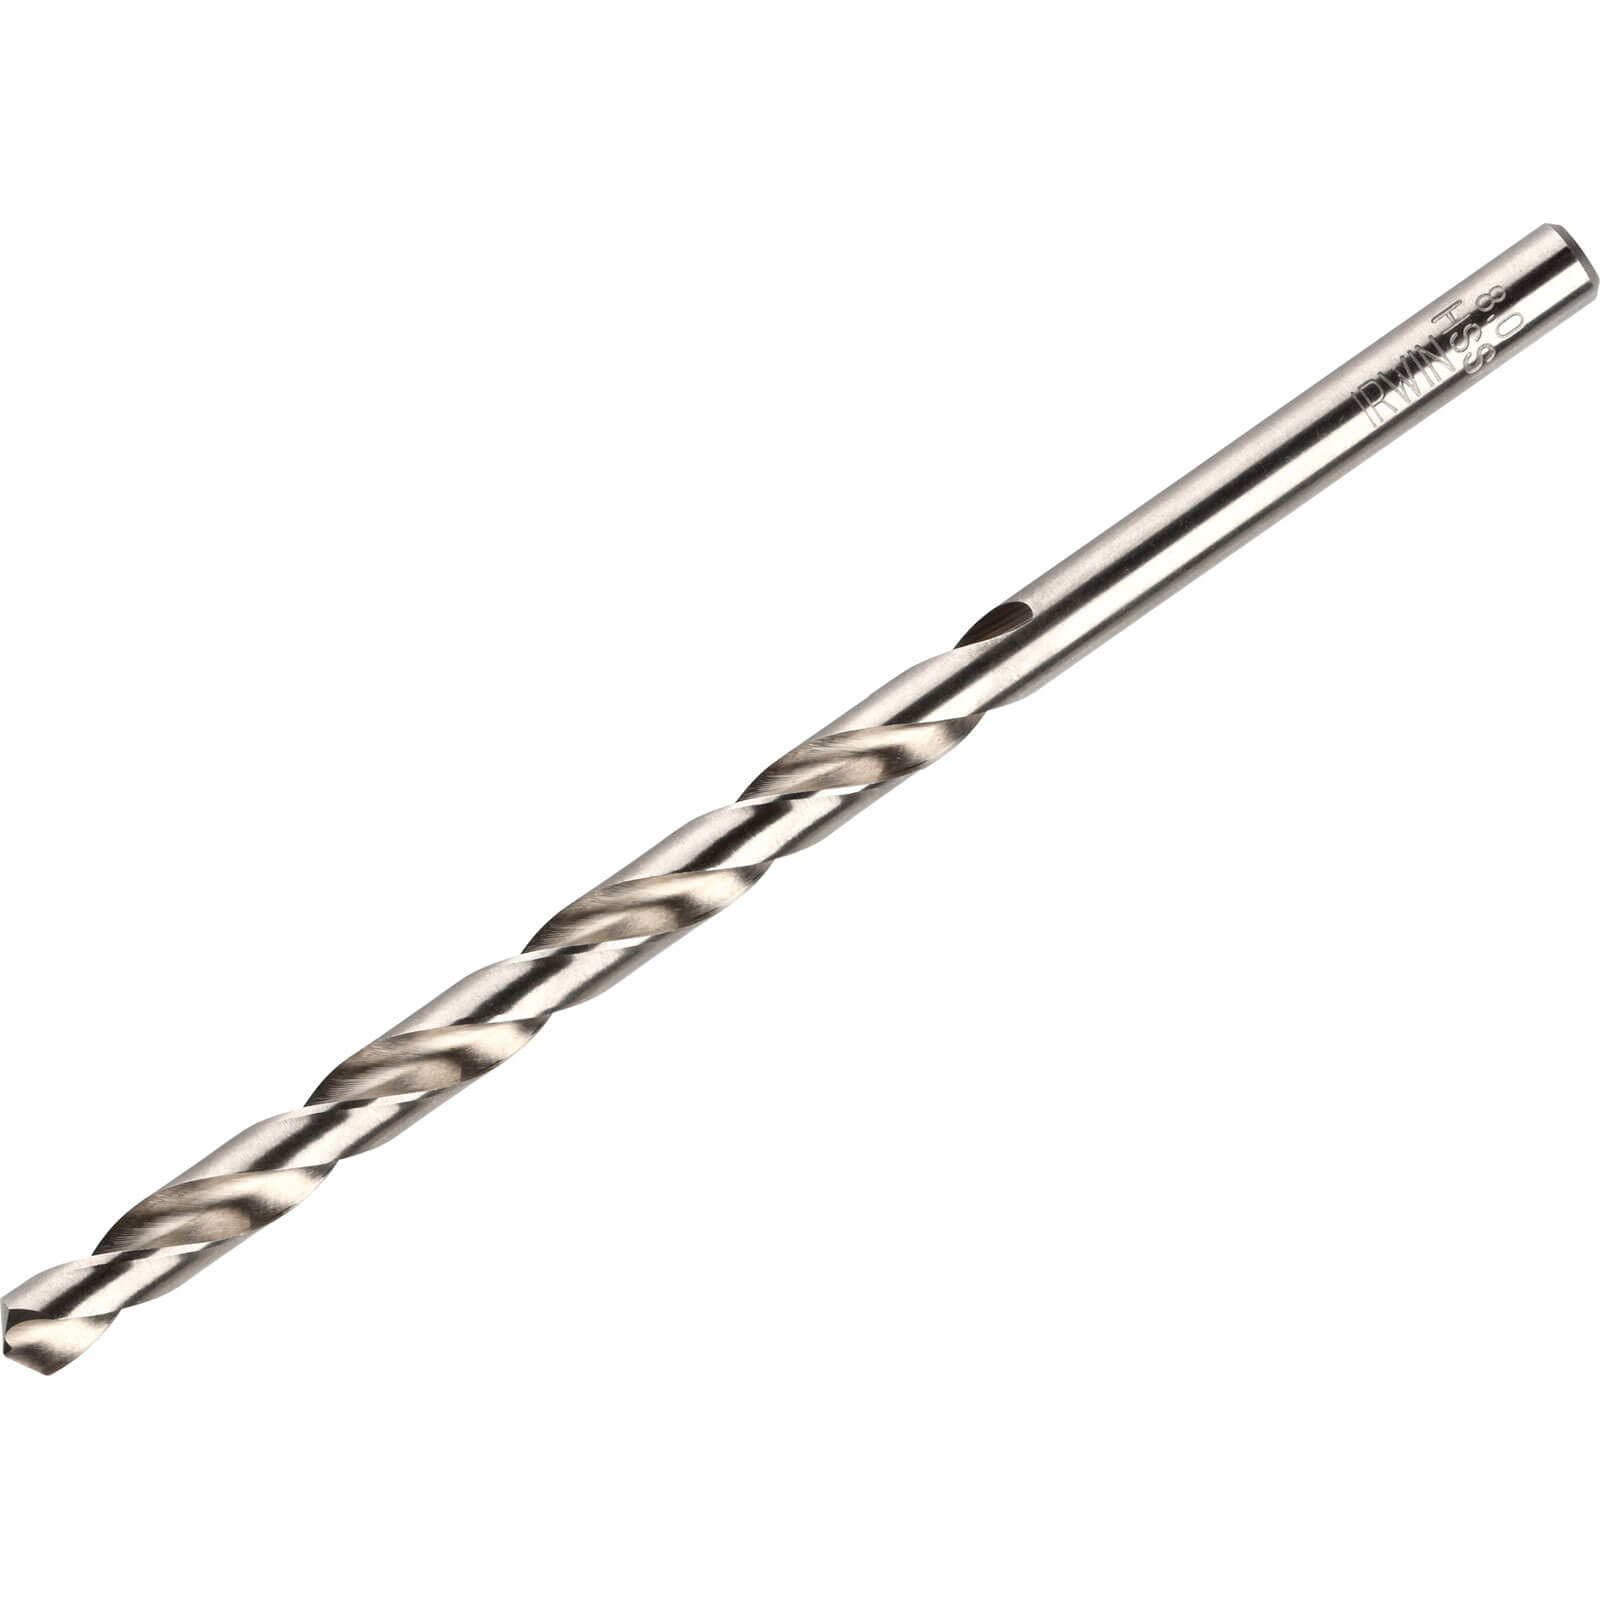 Photo of Irwin Hss Long Pro Drill Bits 3.5mm Pack Of 10